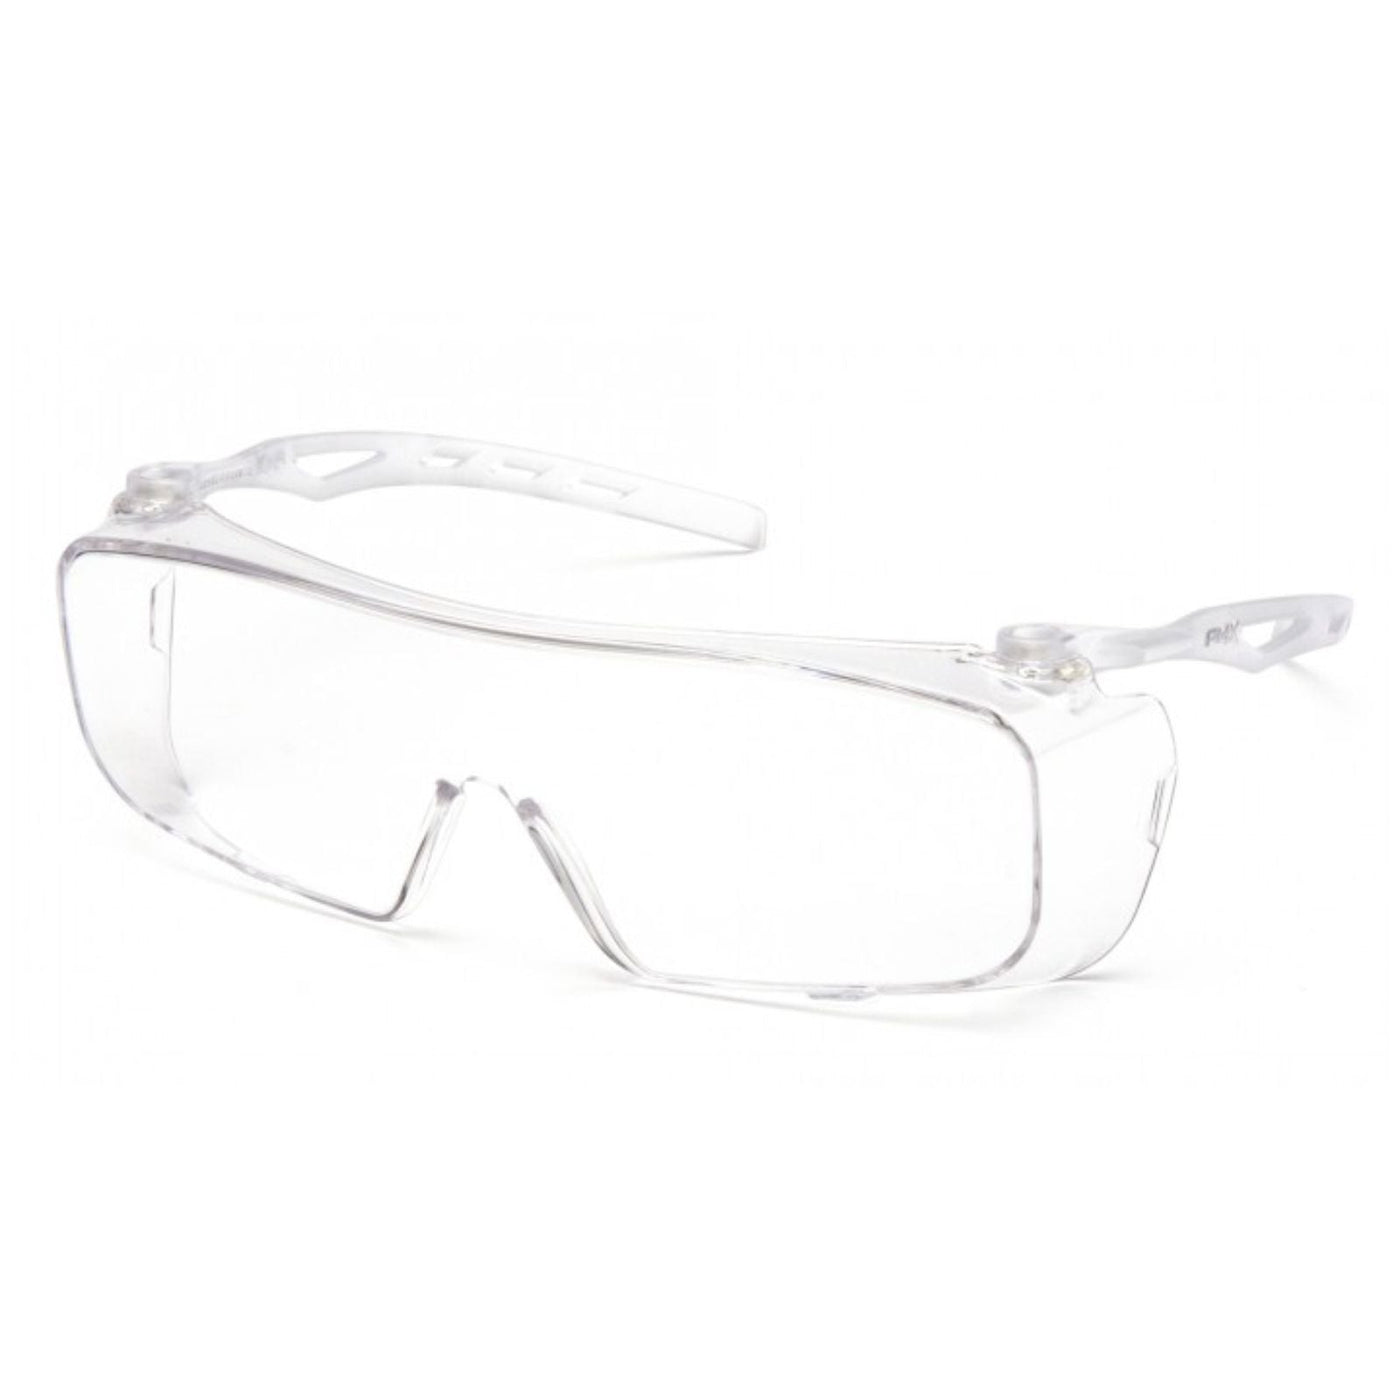 PYRAMEX SAFETY PRODUCTS Pyramex Safety Glasses Cappture Clear H2X AntiFog Dielectric Apparel